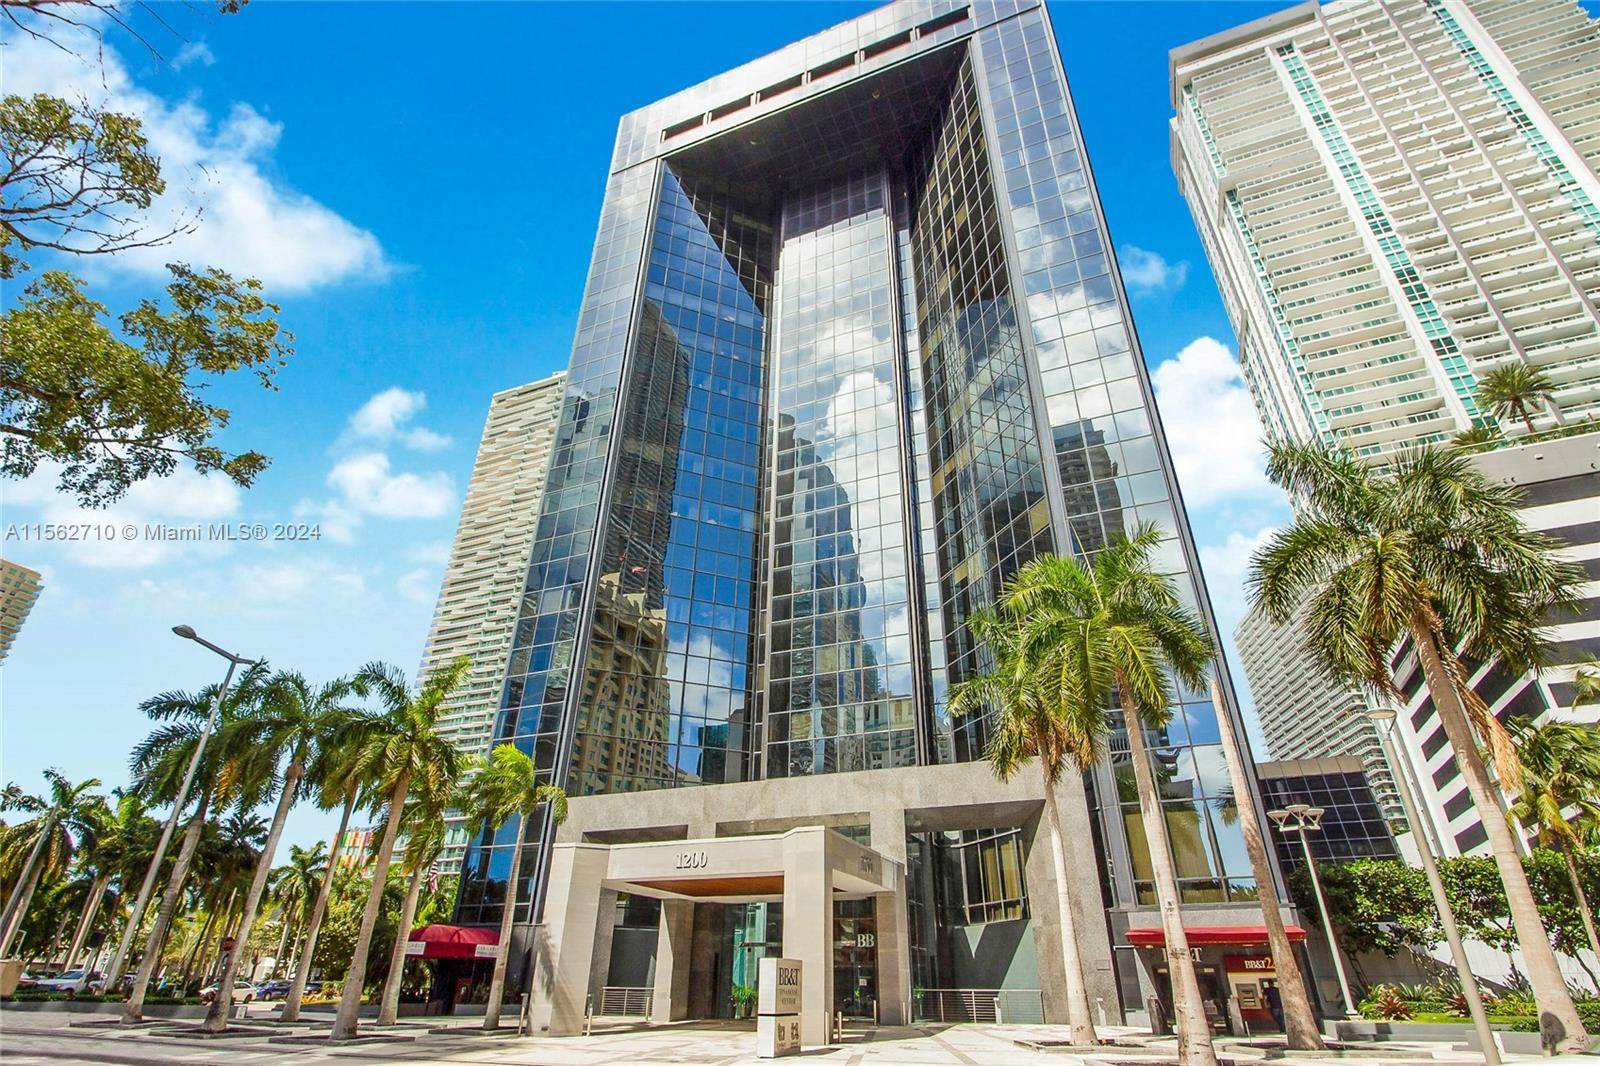 Amazing corner office overlooking Brickell Avenue with 3 private offices, 1 conference room, break room and large open working area.